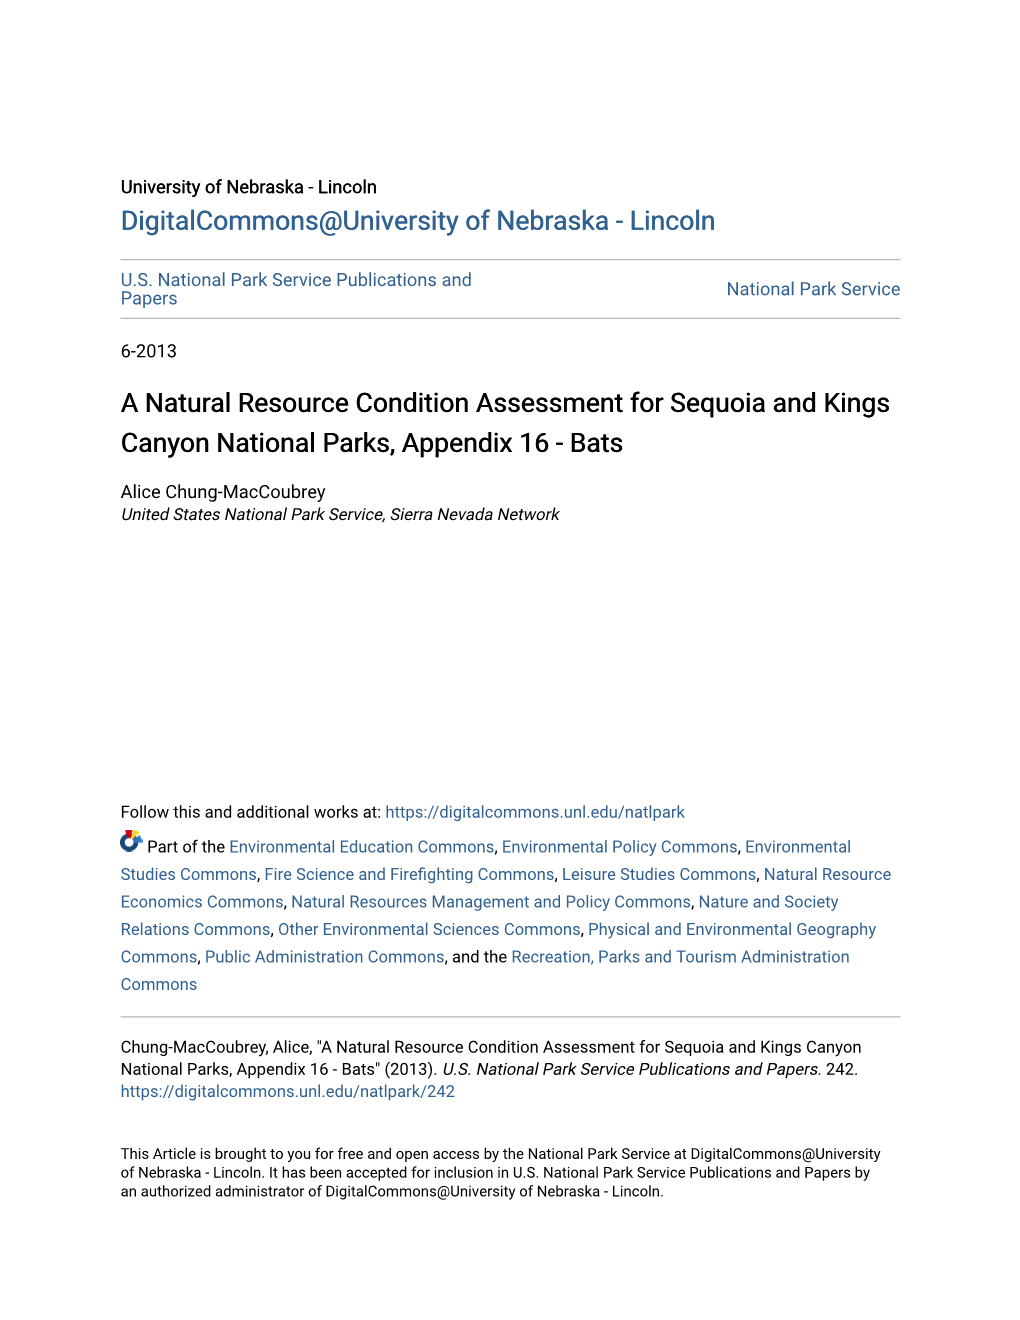 A Natural Resource Condition Assessment for Sequoia and Kings Canyon National Parks, Appendix 16 - Bats